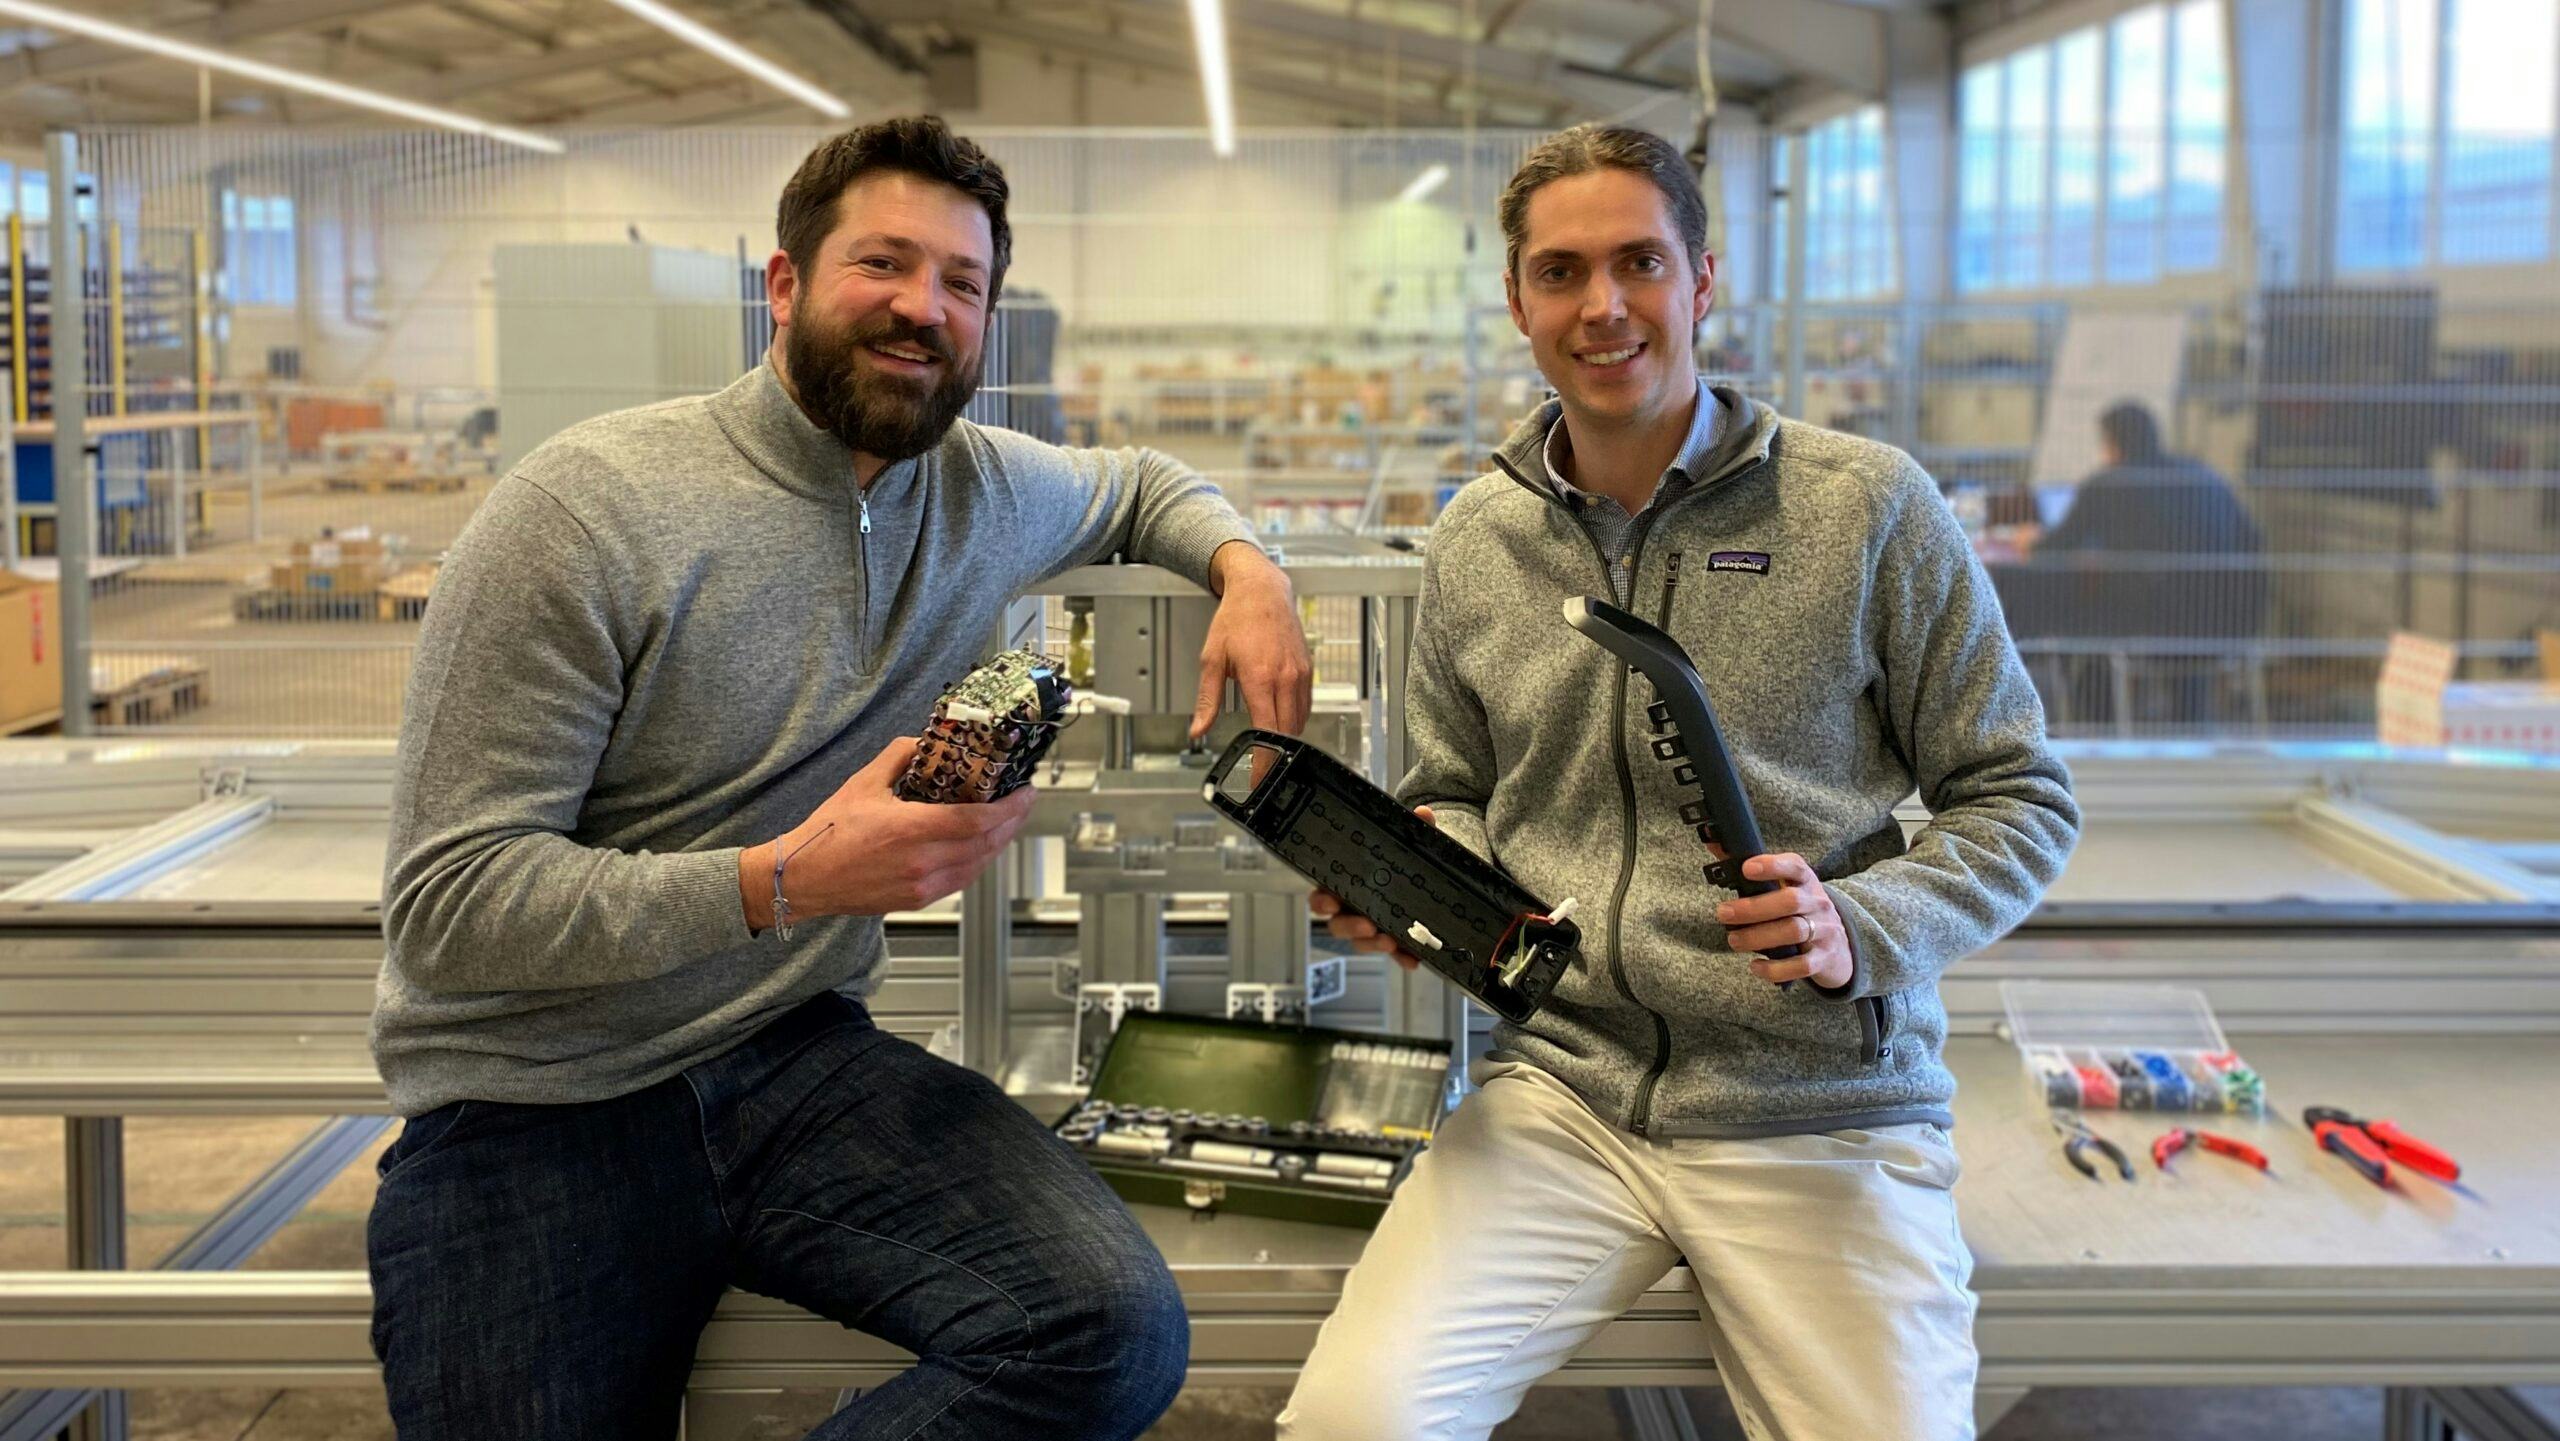 Circu Li-ion founders Antoine Welter, left, and Xavier Kohll, right, aim to fight the climate crisis by maximising the lifecycle of each lithium-ion cell in e-bike battery packs. - Photo Circu Li-ion